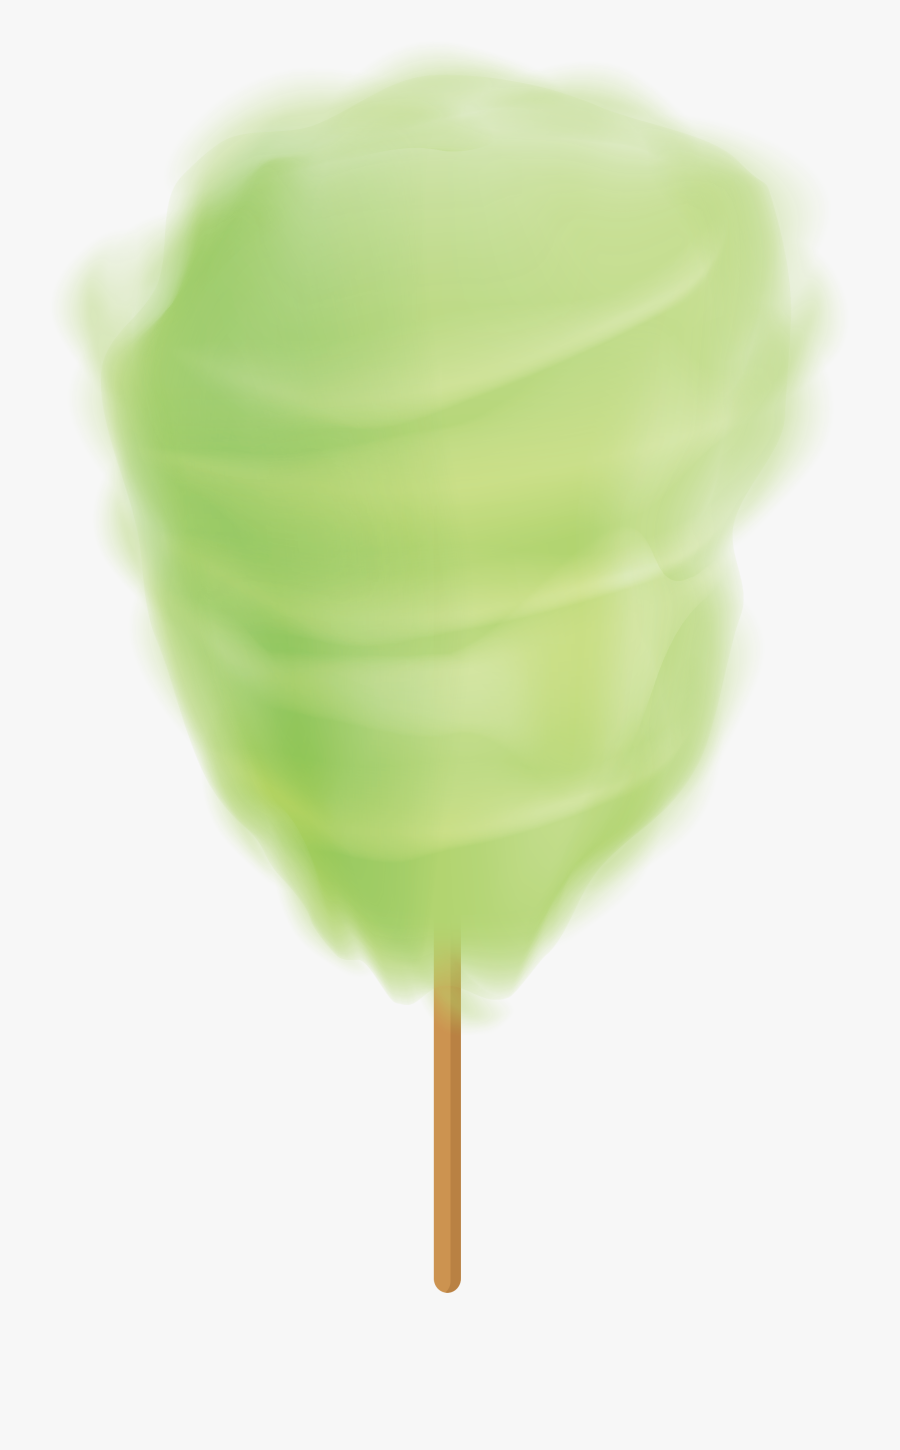 Green Cotton Candy Png, Transparent Clipart